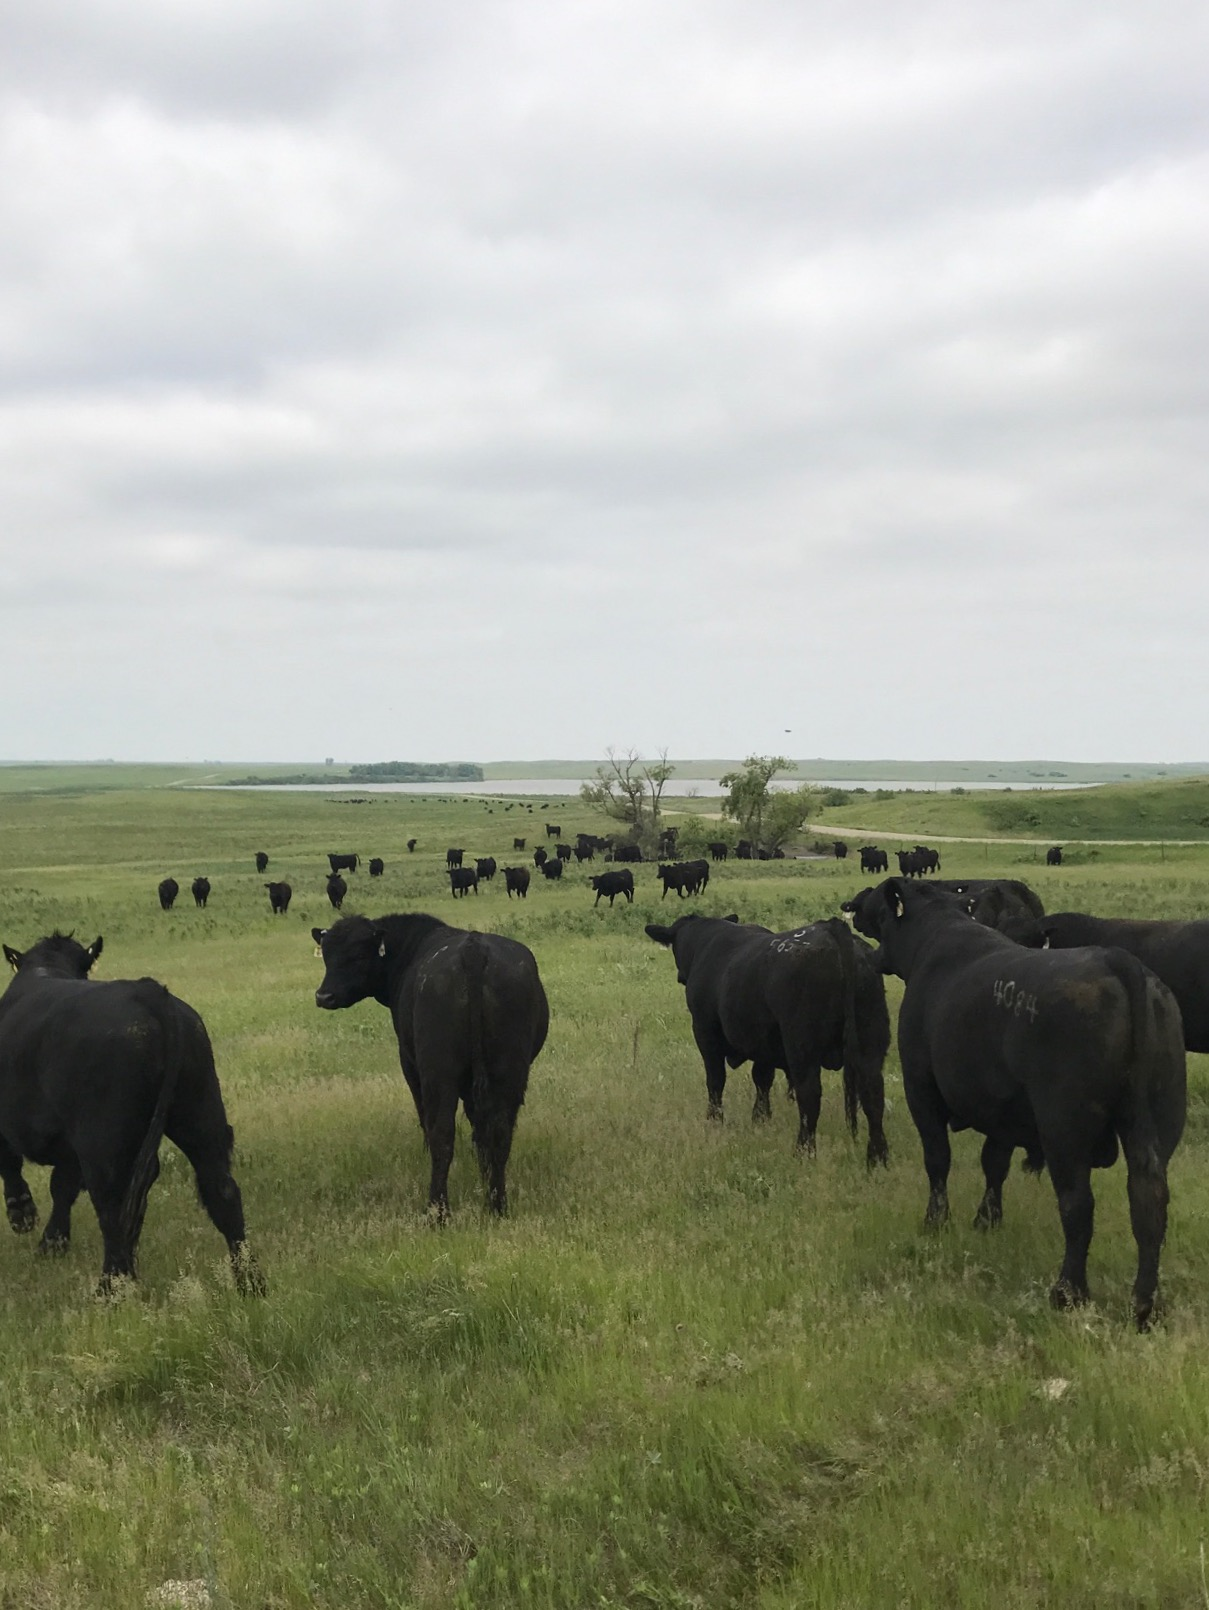 Mid-morning Ag News, March 28, 2022: U.S., Japan Reach Agreement on American Beef Import Targets